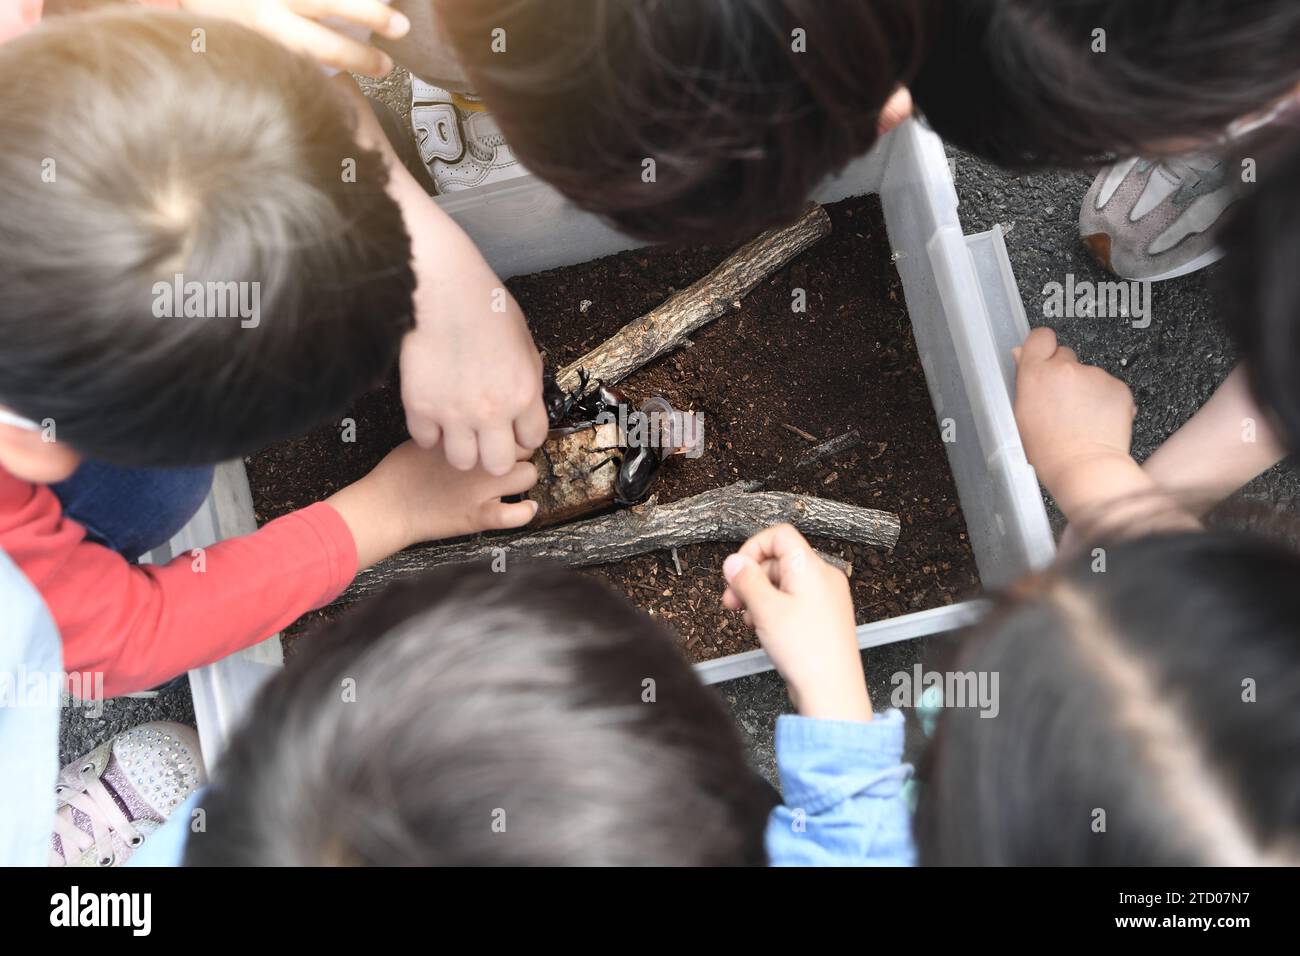 Children gather and experience learning, observing and touching scarabs Stock Photo